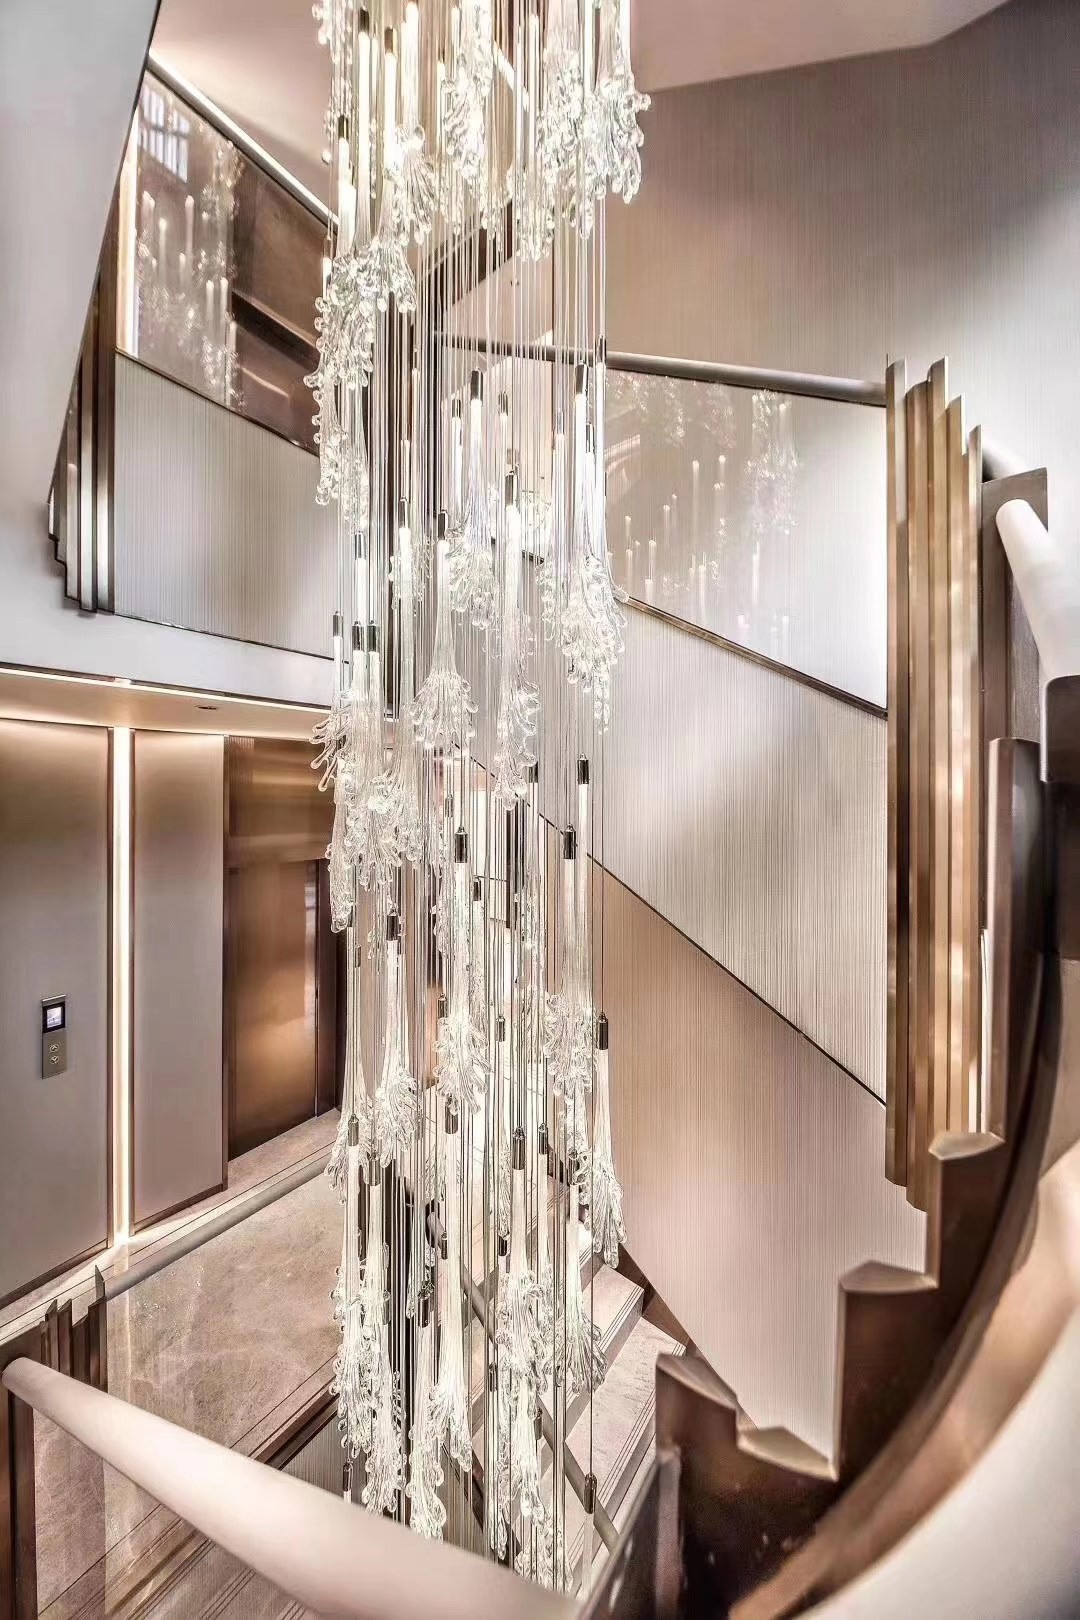 Spiral Stairs Lighting Fixtures art glass pendant chandeliers for hotel project Decoration